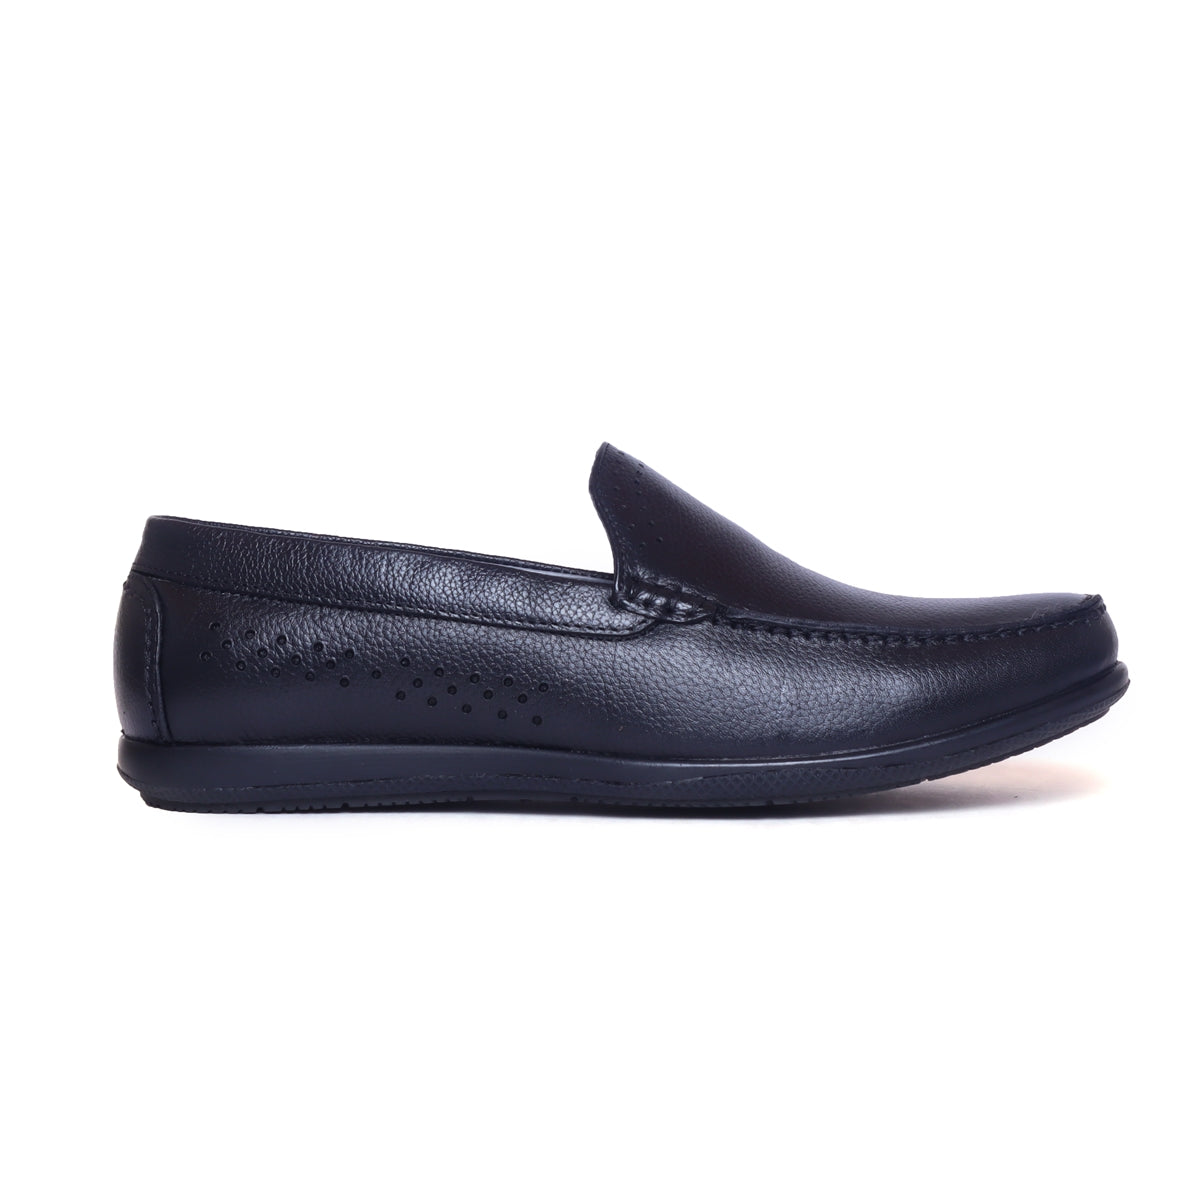 leather loafers for men_ZS7